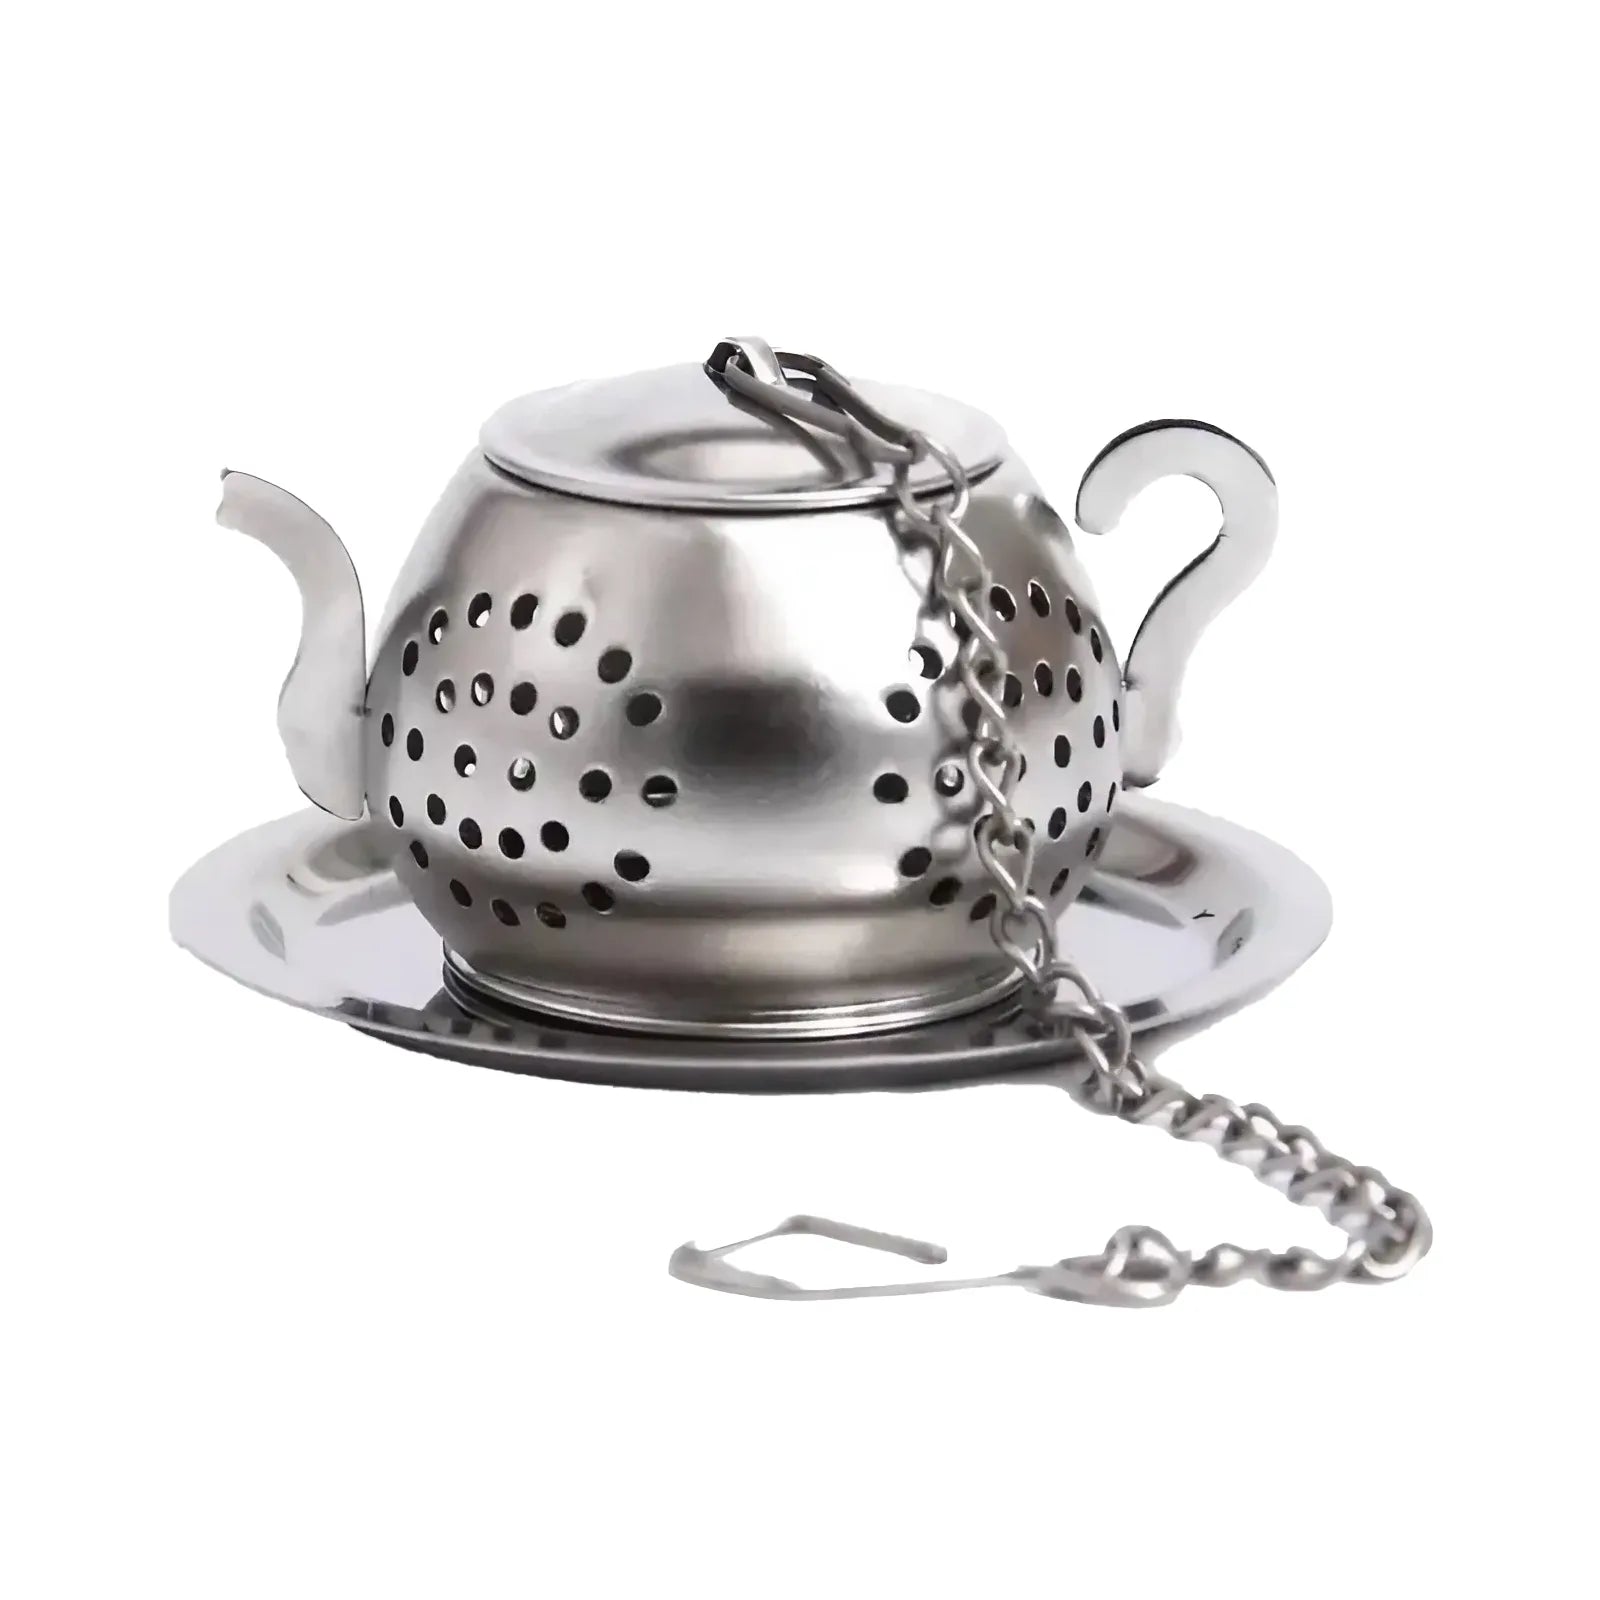 Silver Stainless Steel Loose Leaf Tea Infuser Teapot Ball with Chain and Drip Tray mi maiv